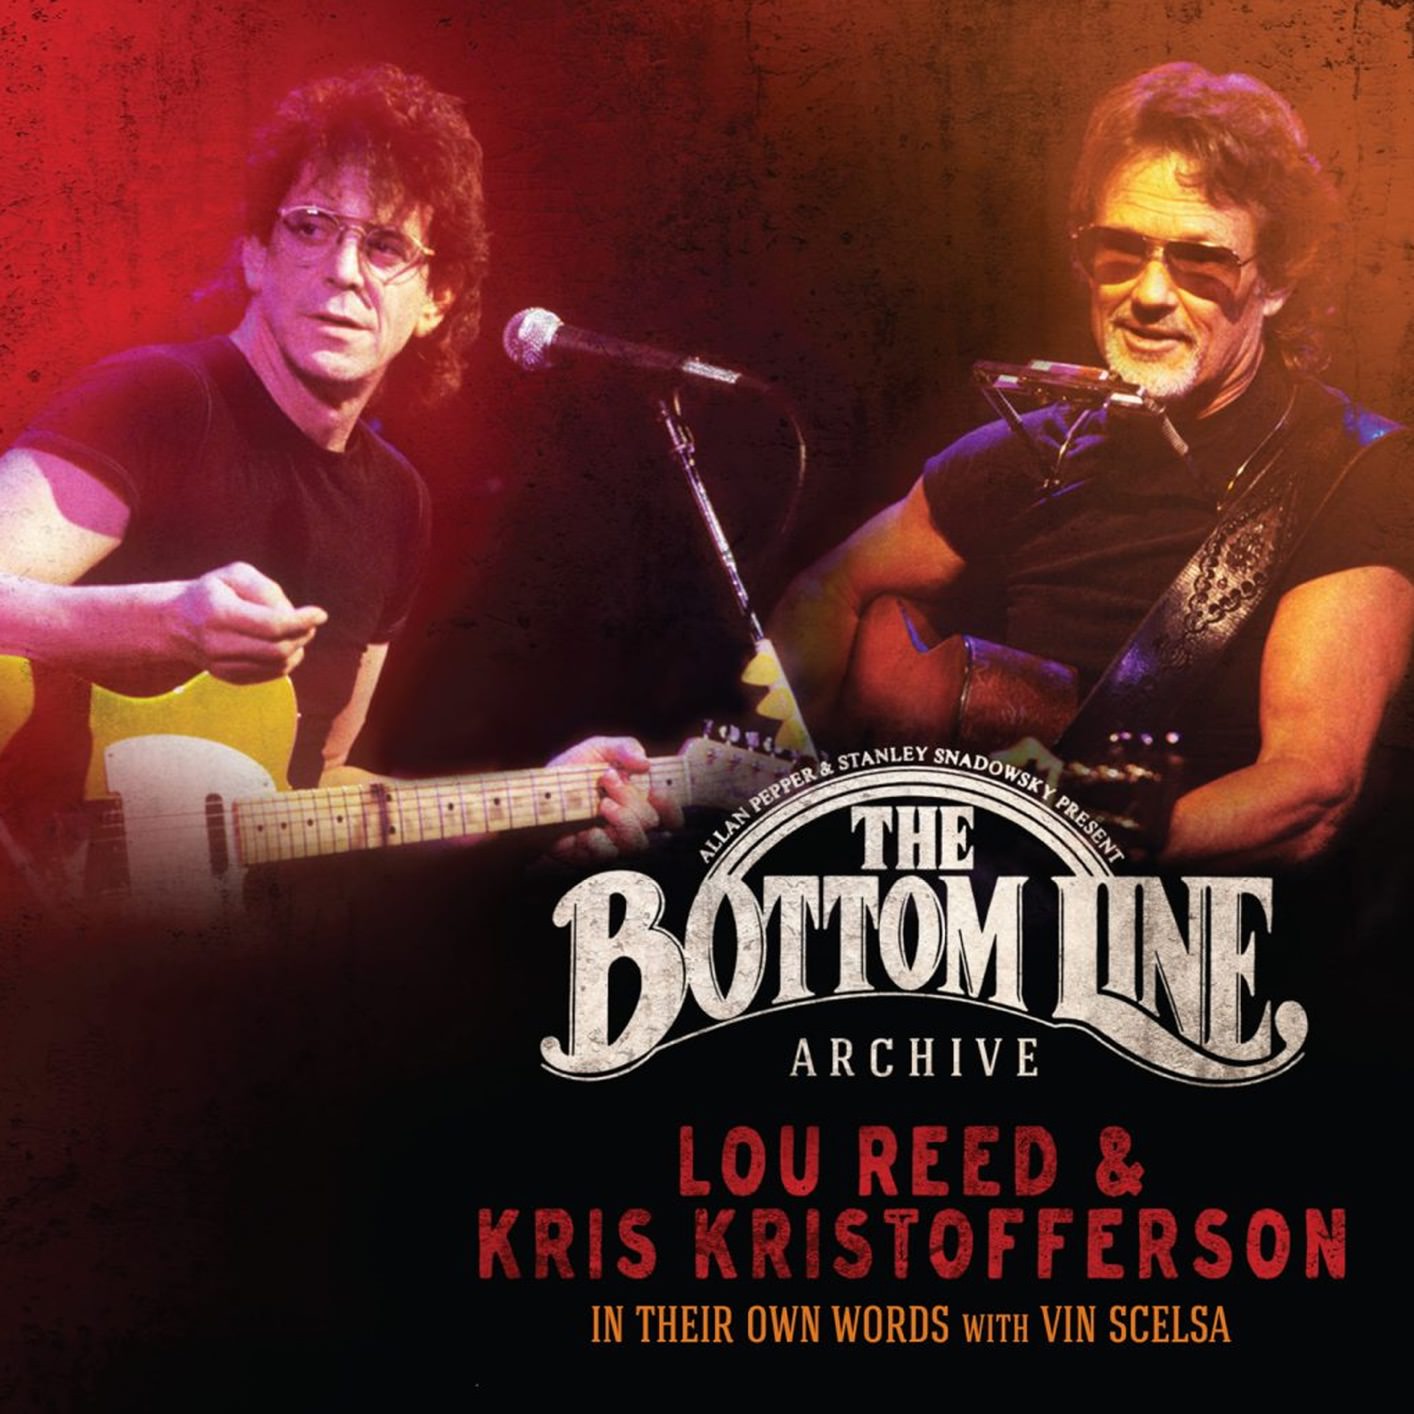 Lou Reed & Kris Kristofferson - The Bottom Line Archive Series: In Their Own Words With Vin Scelsa (2017/2018) [FLAC 24bit/44,1kHz]